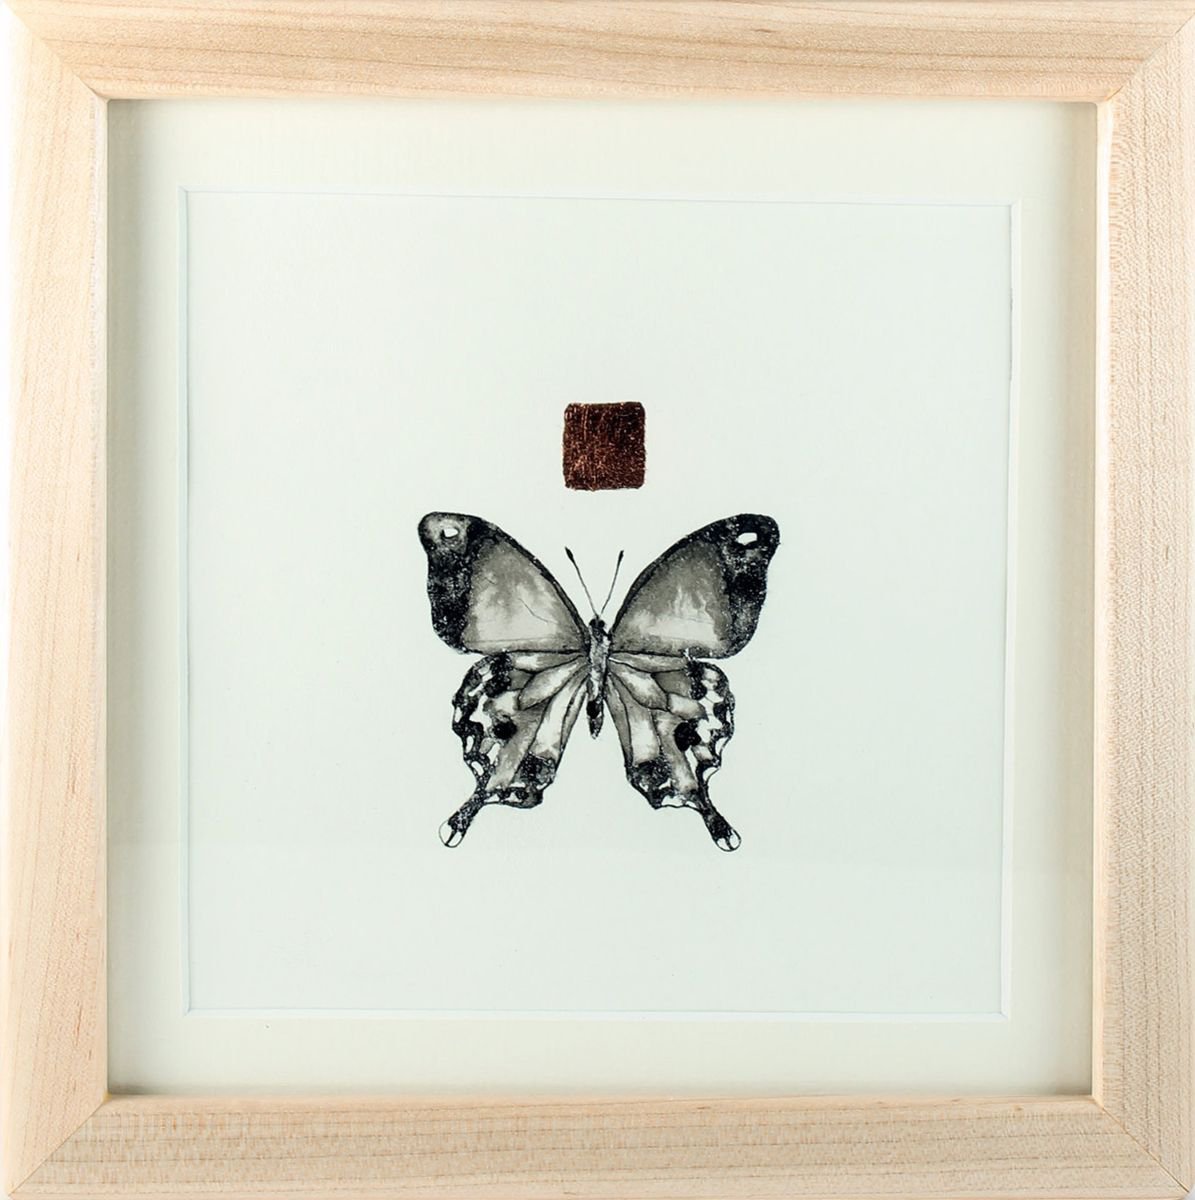 Swallowtail Butterfly / Intricate Ink Painting with Copper / Framed in a Maple Frame by Alexa Karabin